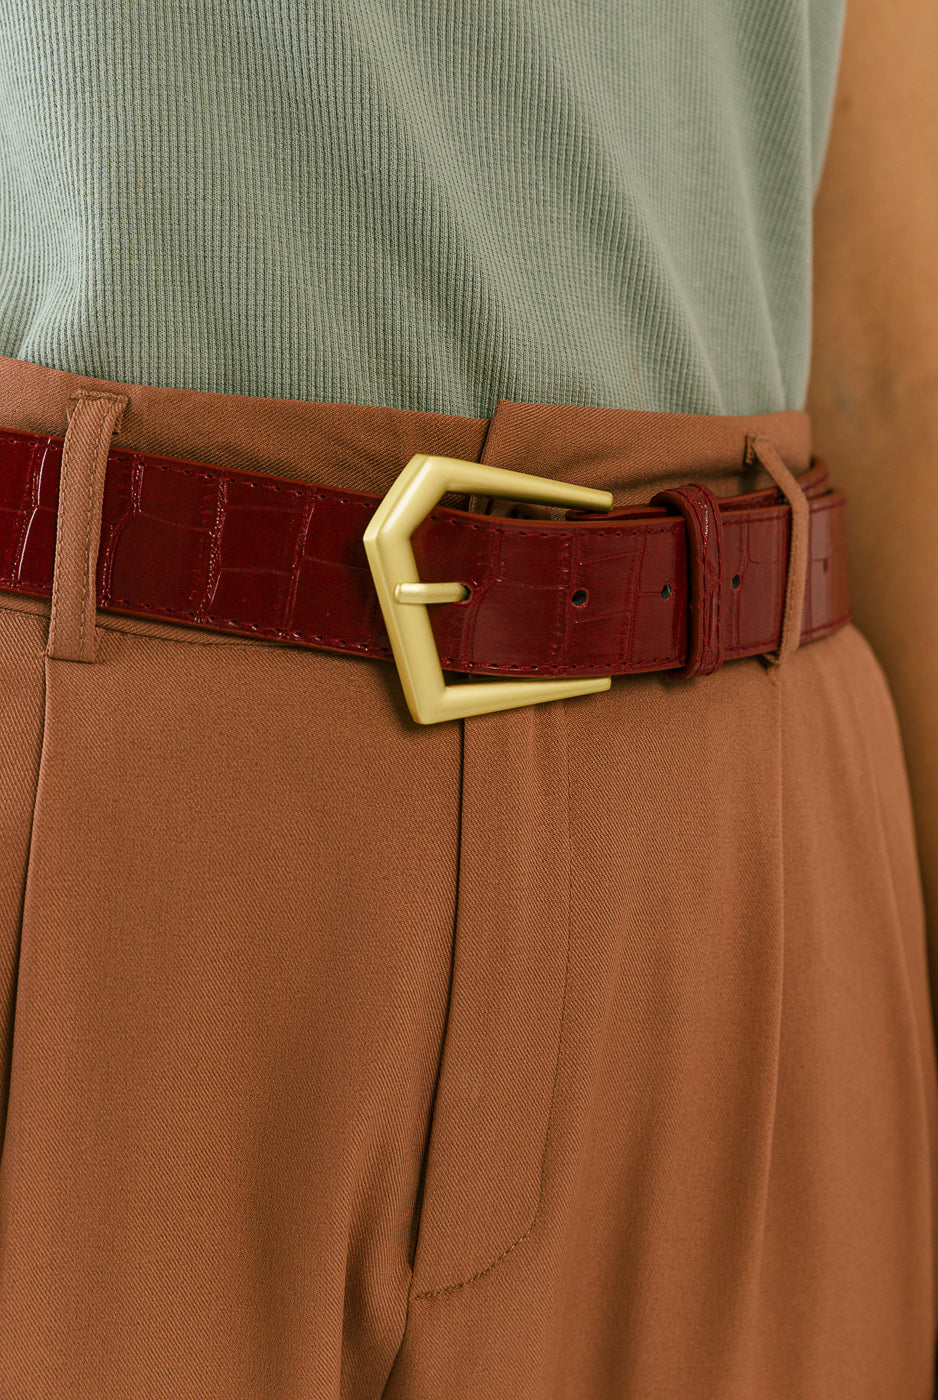 Textured Faux Leather Belt - BEECHTREE